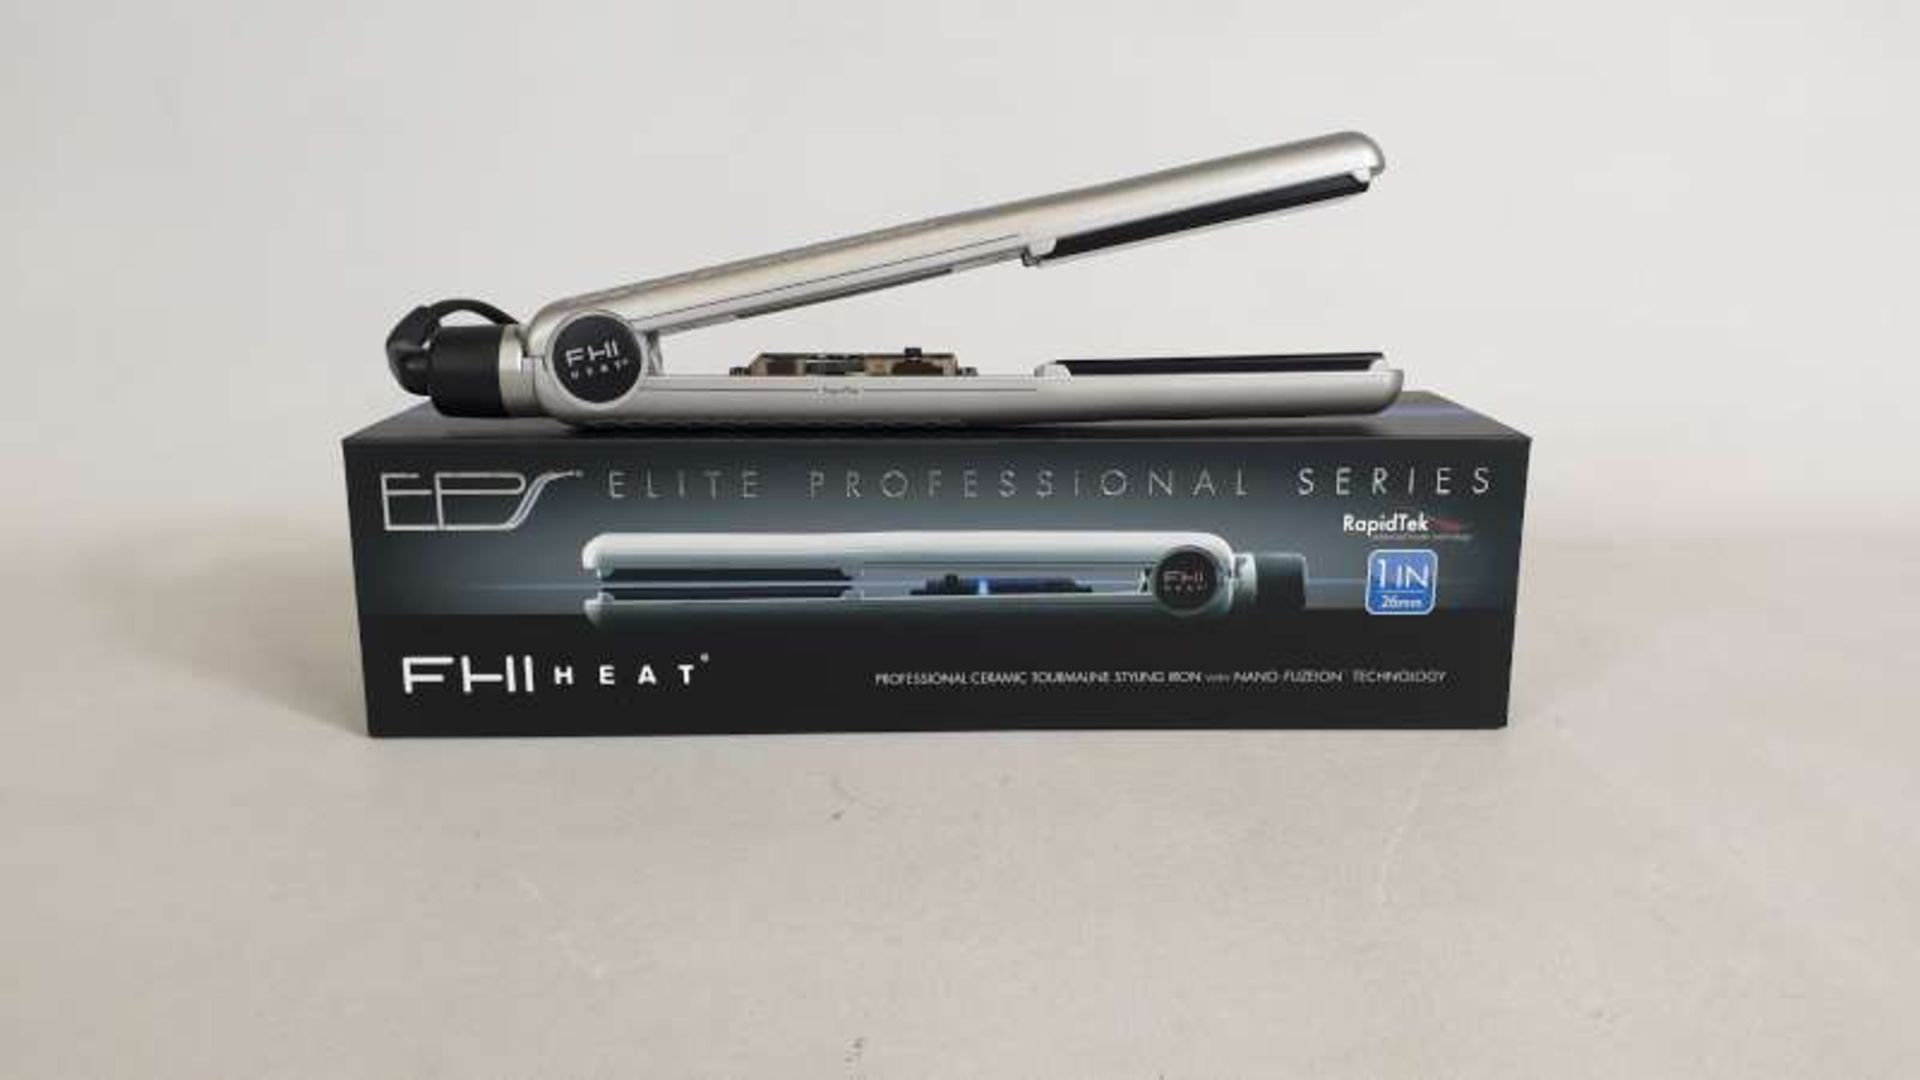 5 X BRAND NEW FH HEAT ELITE PROFESSIONAL SERIES PROFESSIONAL CERAMIC TOURMALINE STYLING IRONS WITH